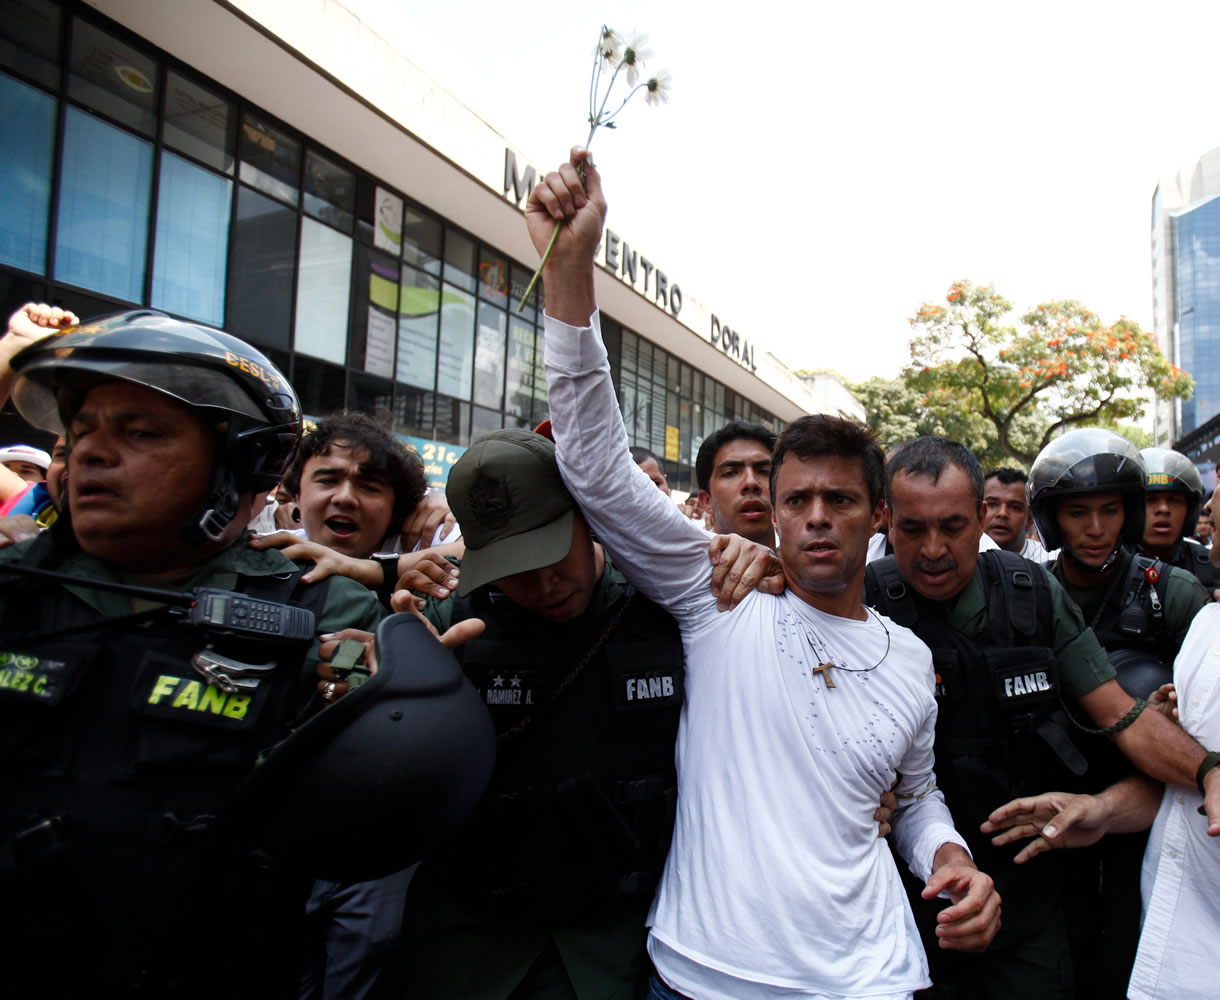 Opposition leader Leopoldo Lopez, holding up a flower, is taken into custody by Bolivarian National Guards on Tuesday in Caracas, Venezuela.